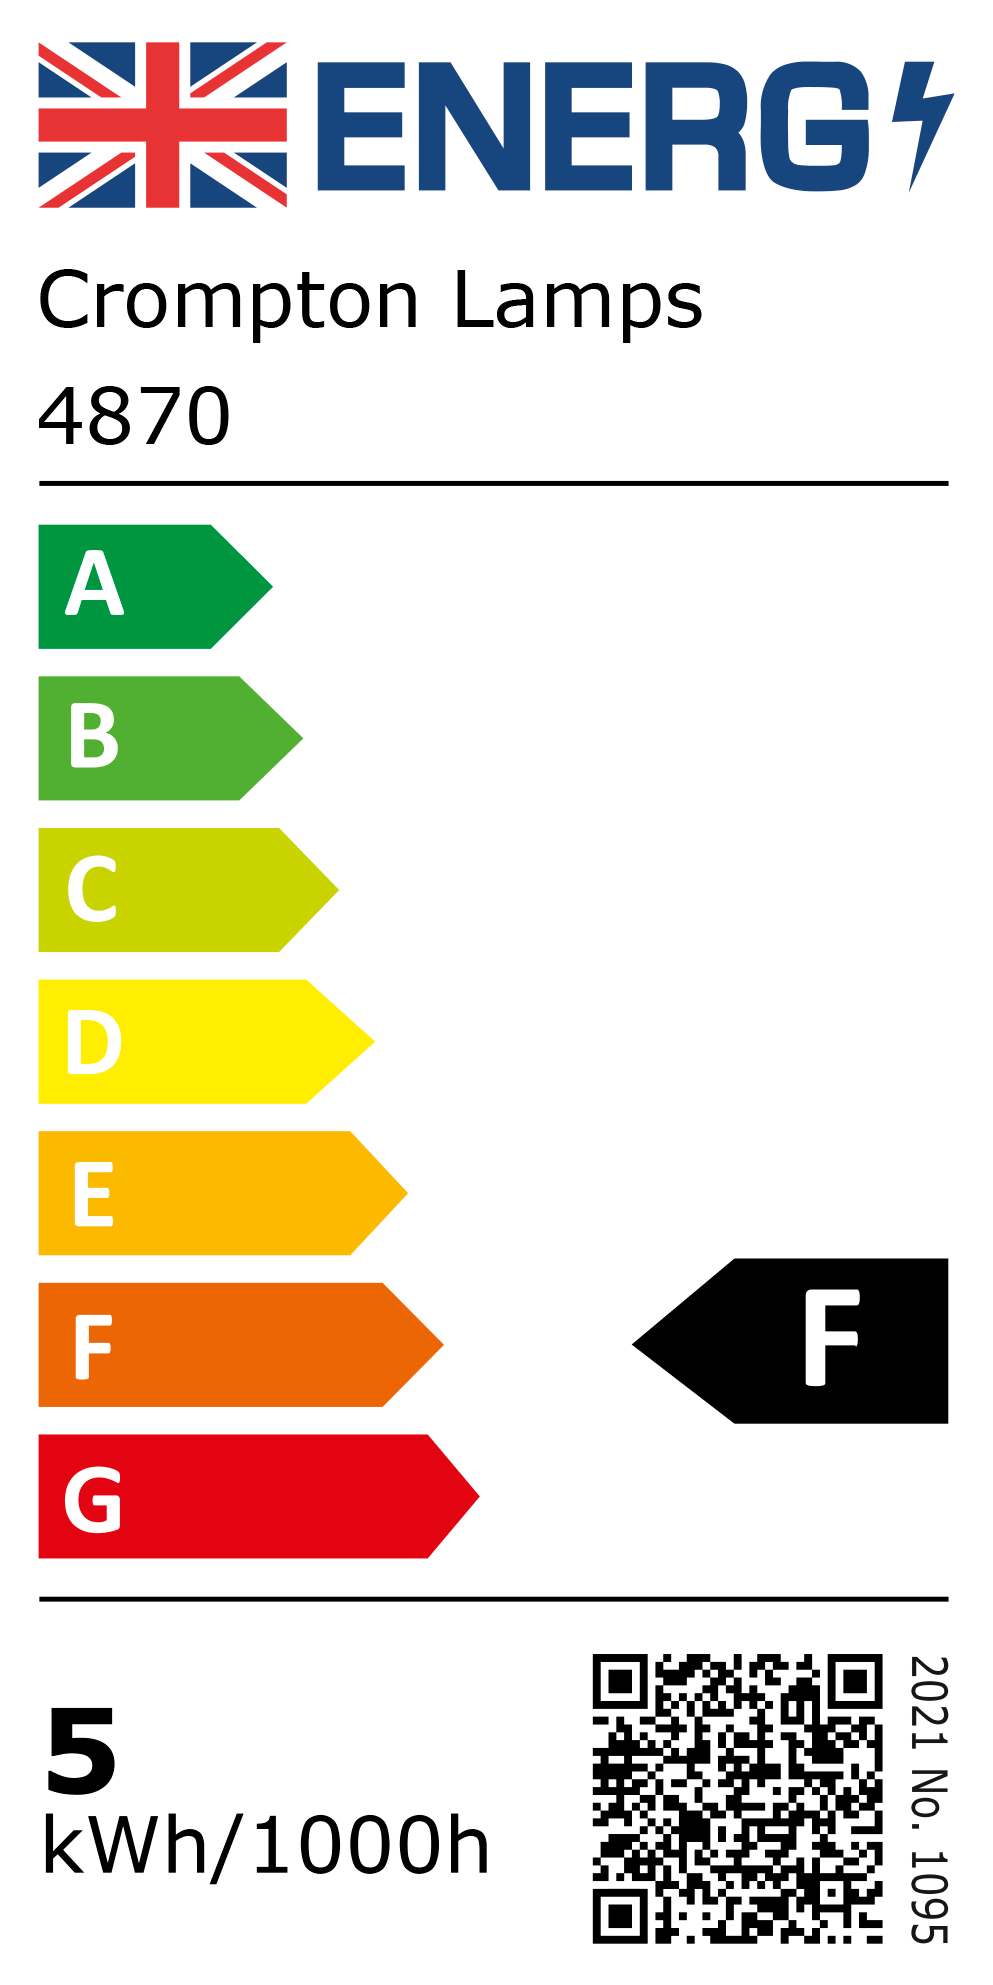 New 2021 Energy Rating Label: Stock Code 4870